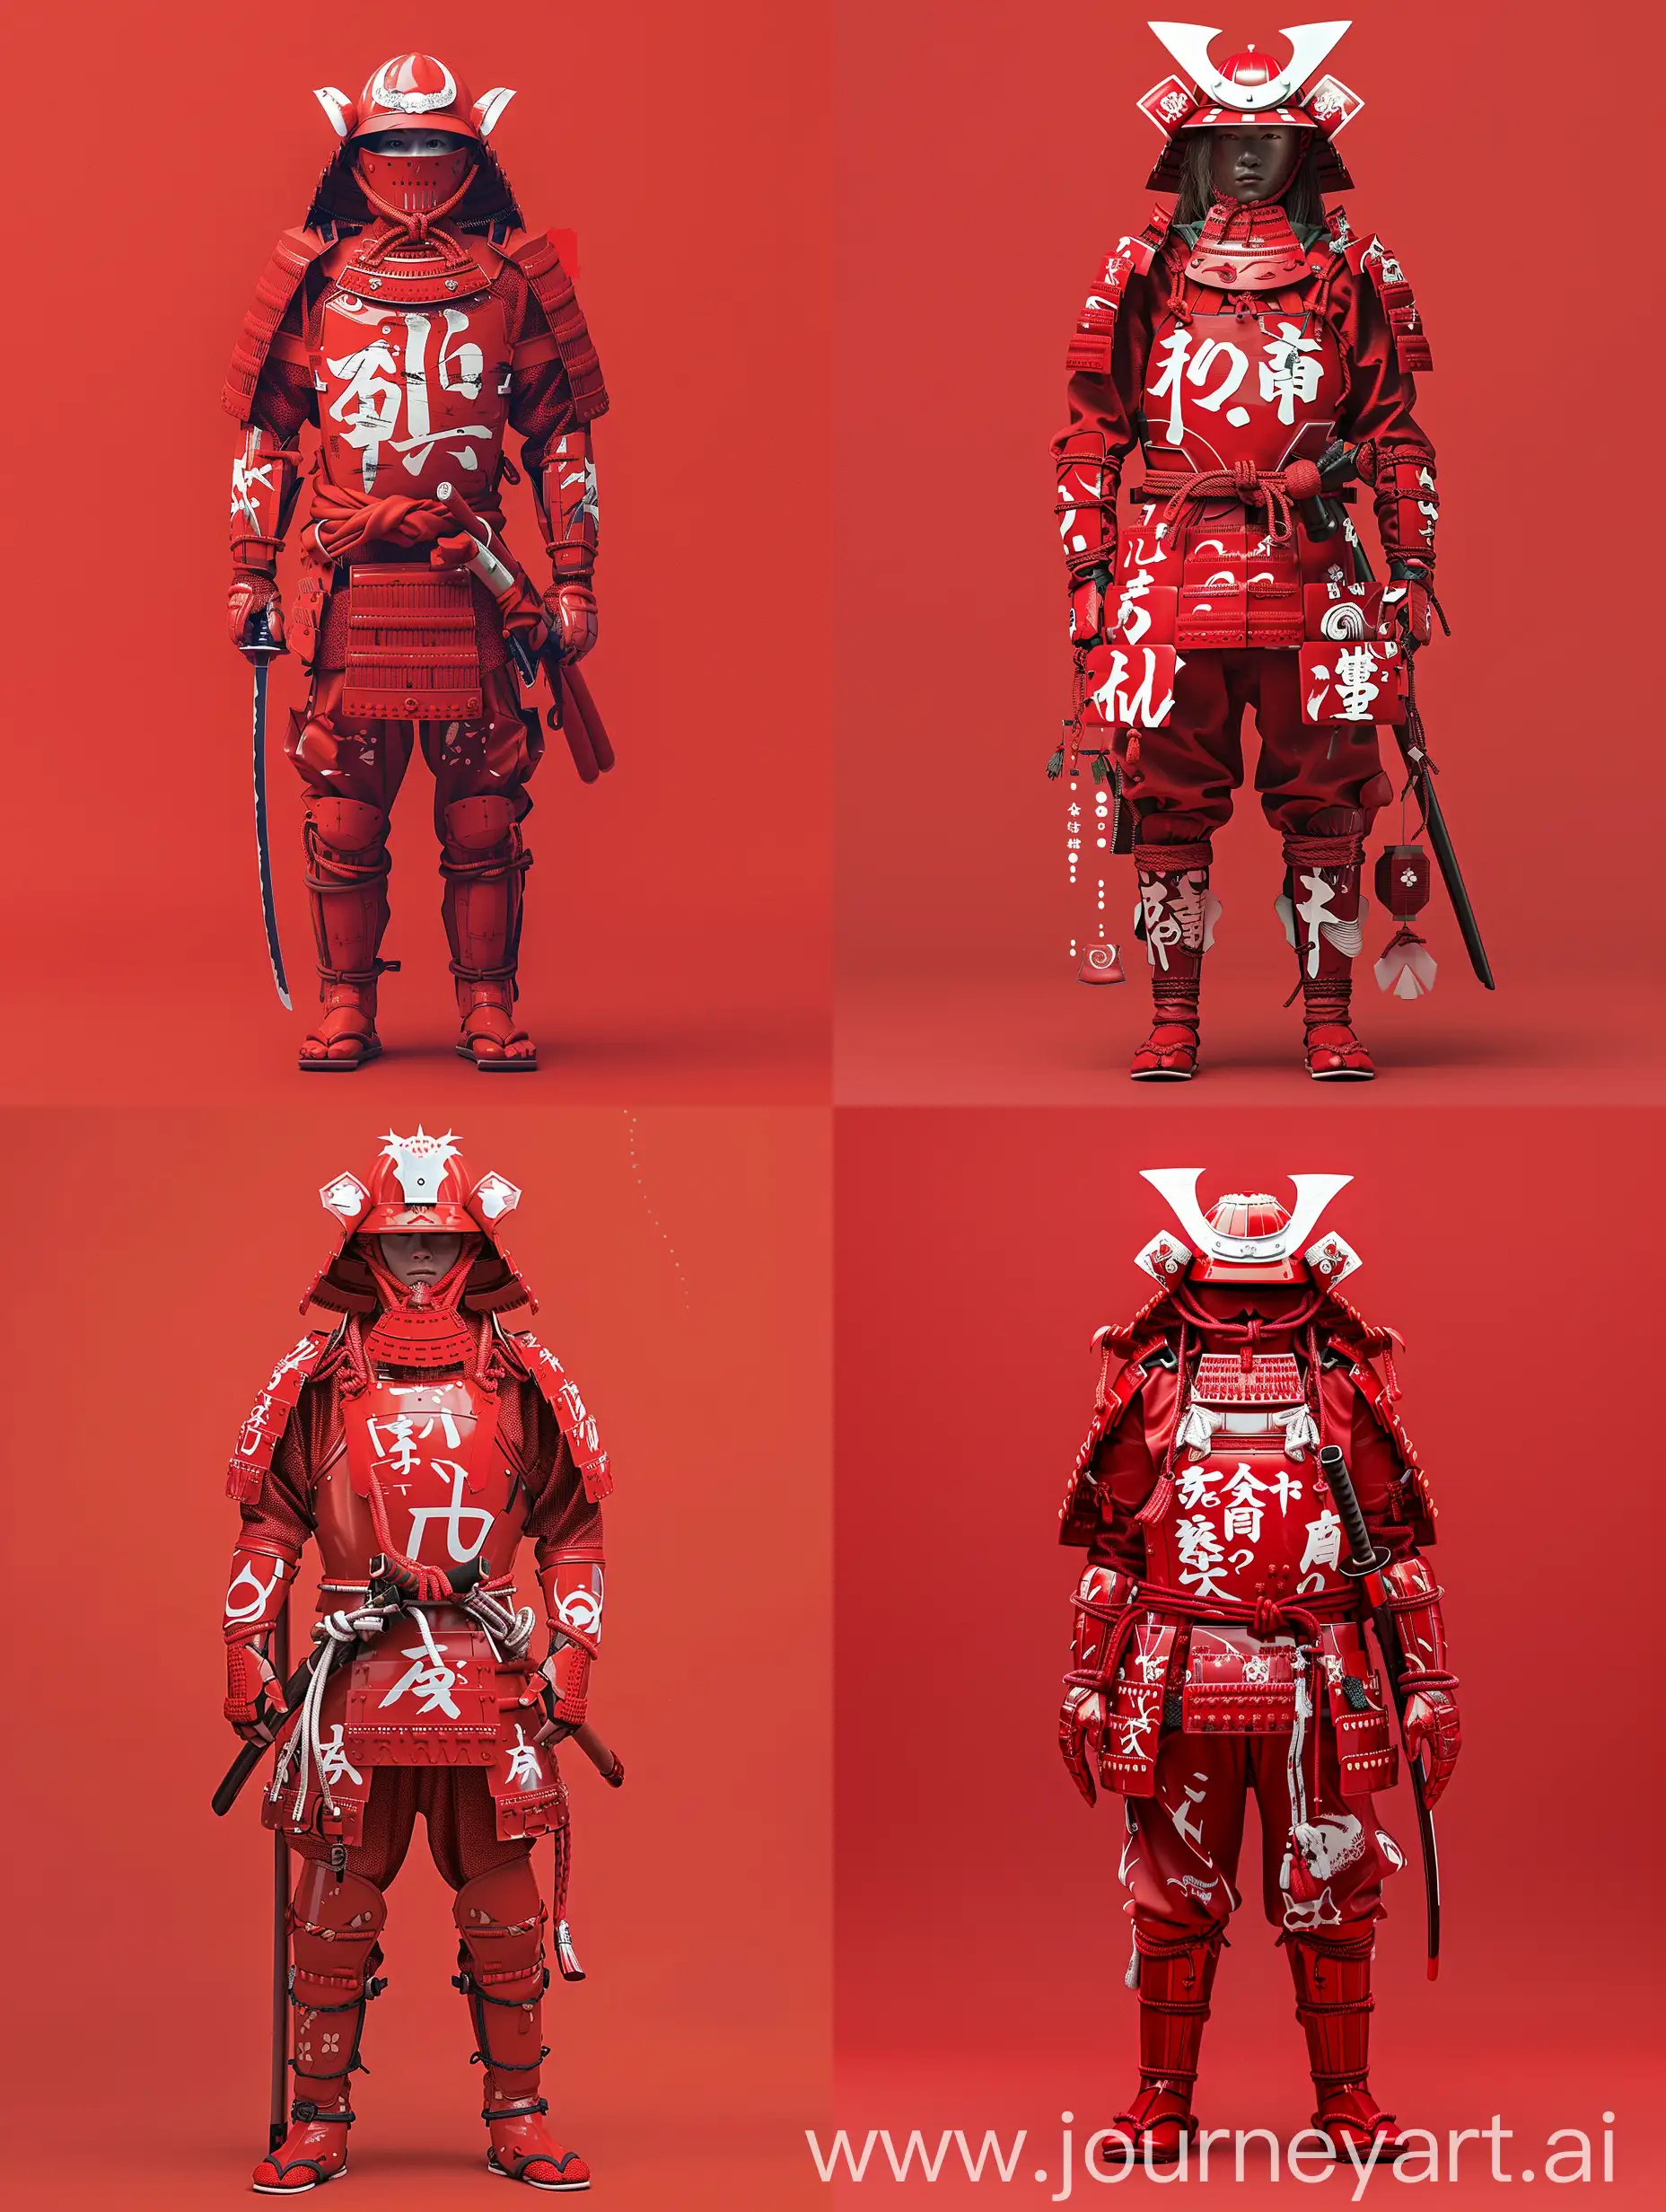 A person wearing an elaborate red samurai armor, adorned with white Japanese characters and symbols, stands against a solid red background. The armor includes a helmet with a prominent white crest, intricate shoulder guards, a chest plate, and arm and leg protectors. The individual carries a sheathed sword at their side and a smaller dagger at their waist. The overall look is detailed and traditional, exuding a sense of historical Japanese warrior culture.